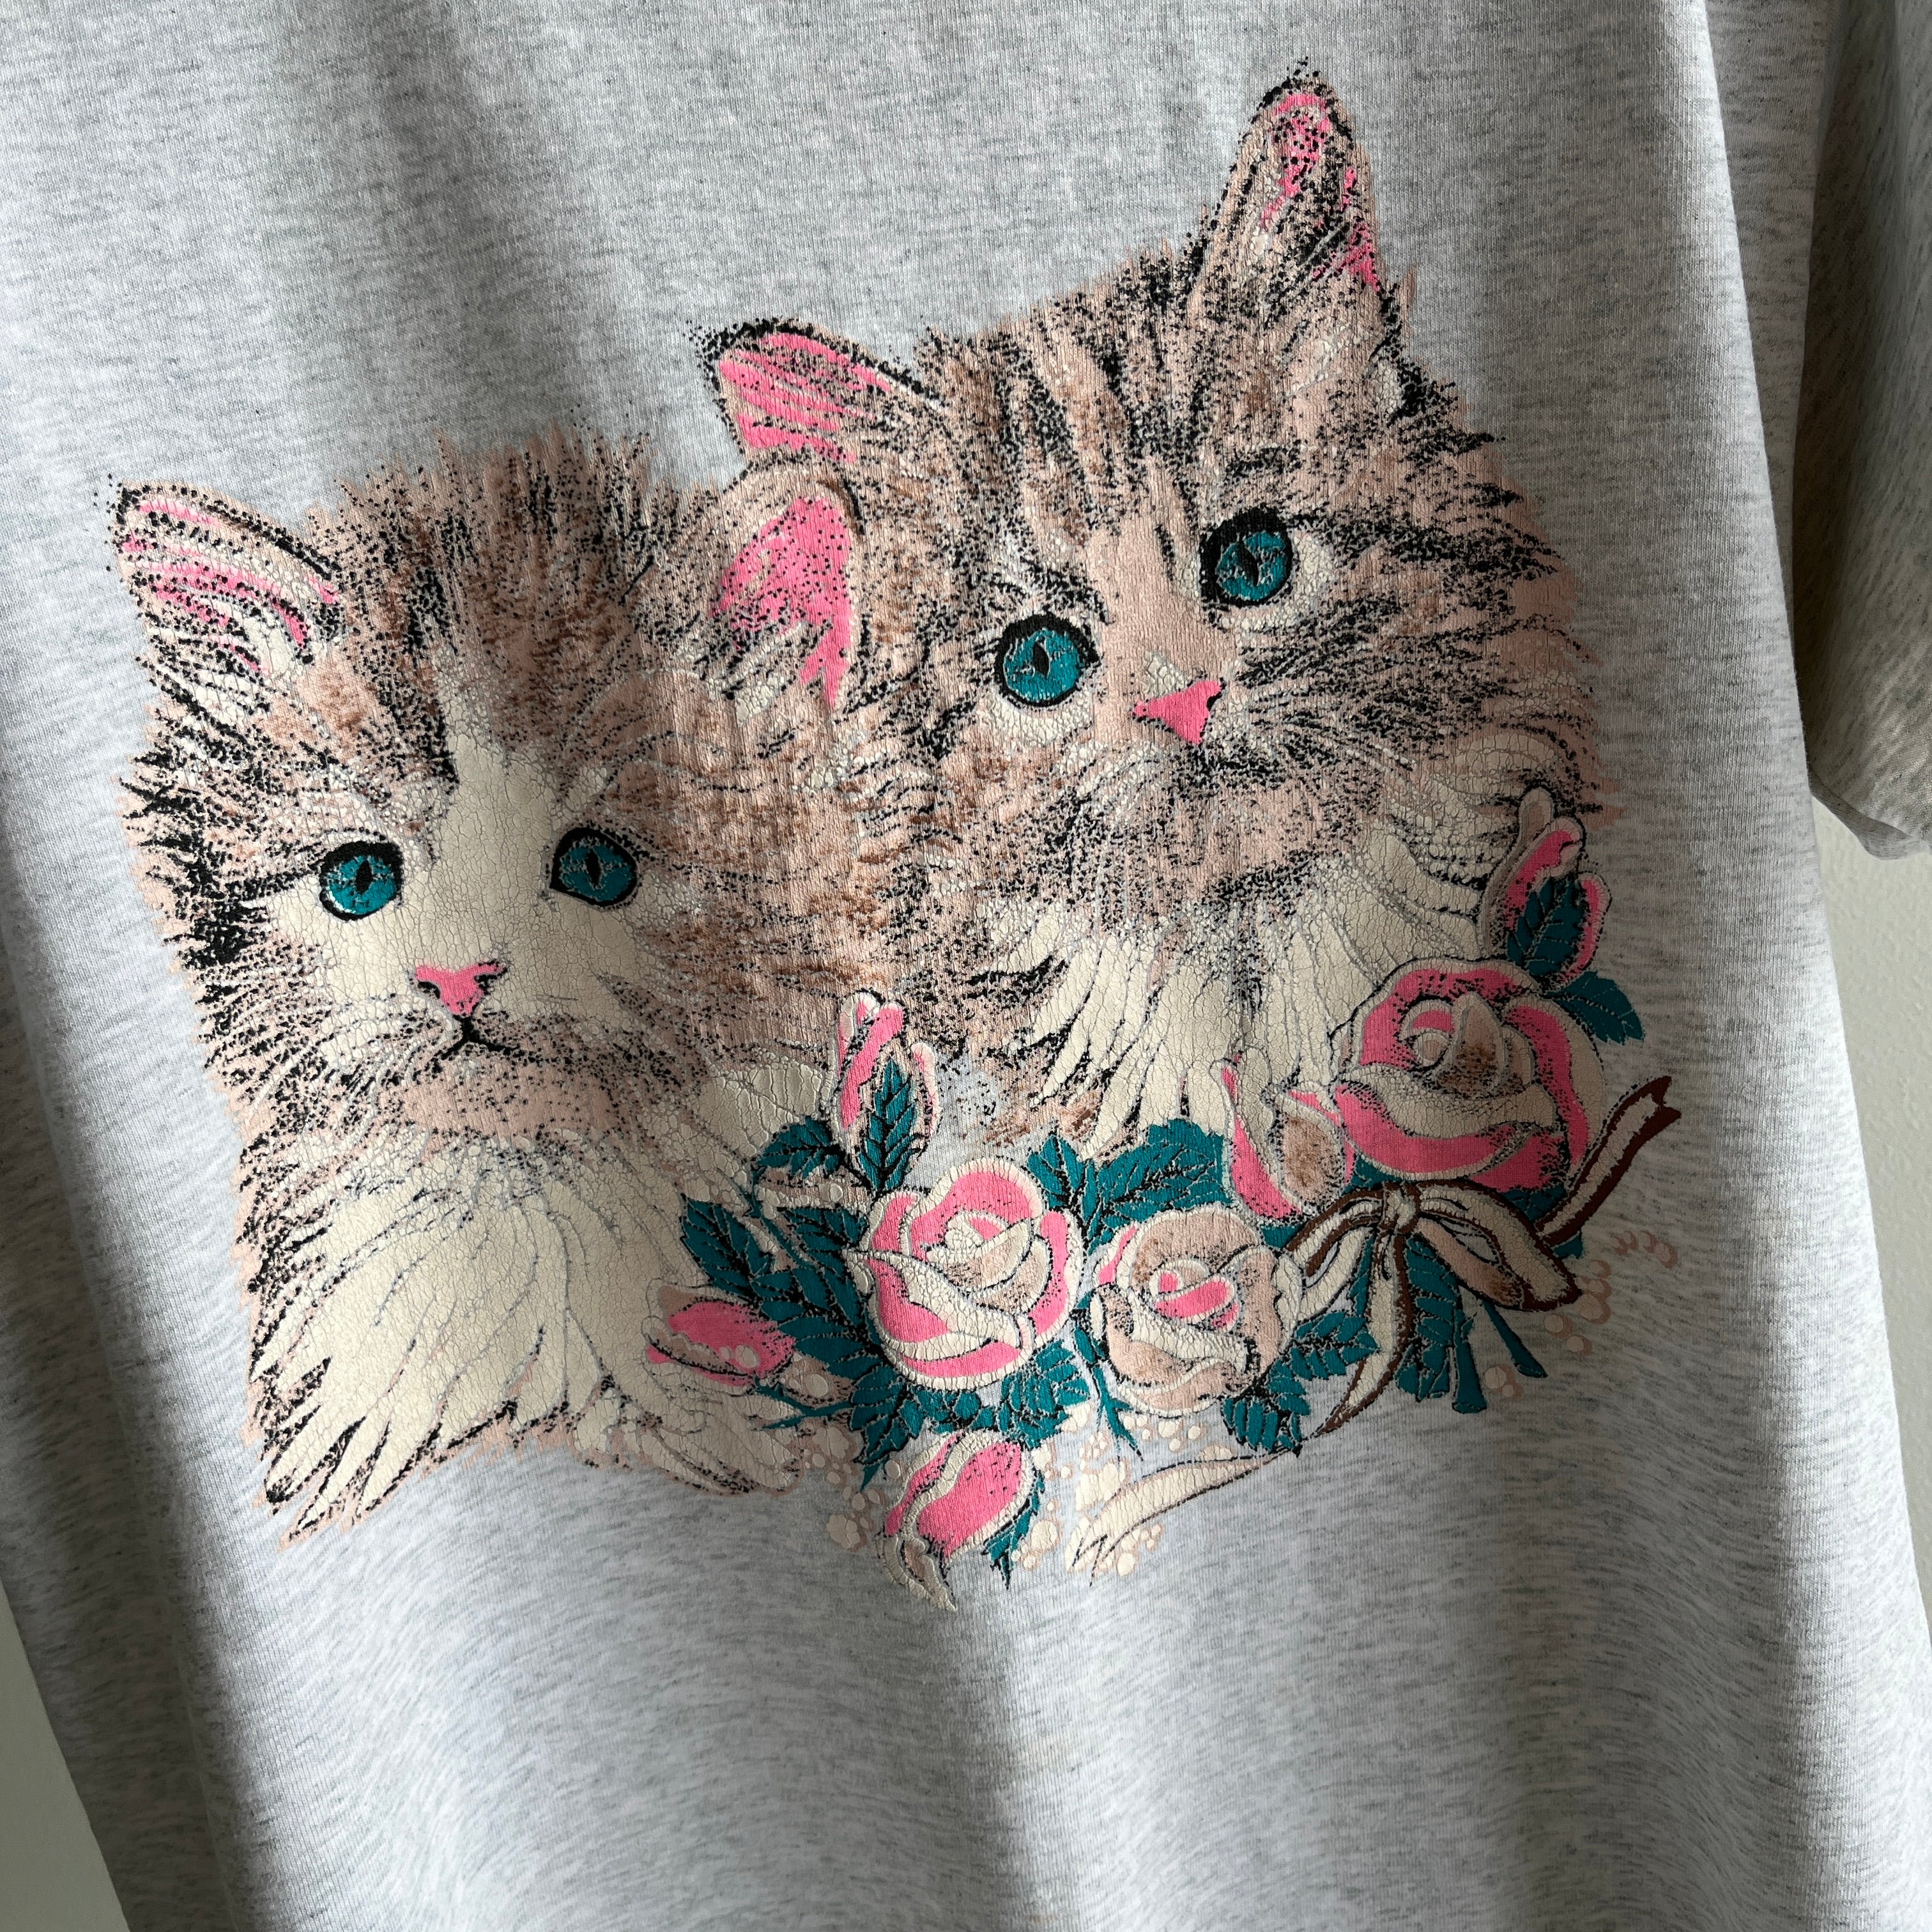 1980s Adorable Cat T-Shirt *You* NEED